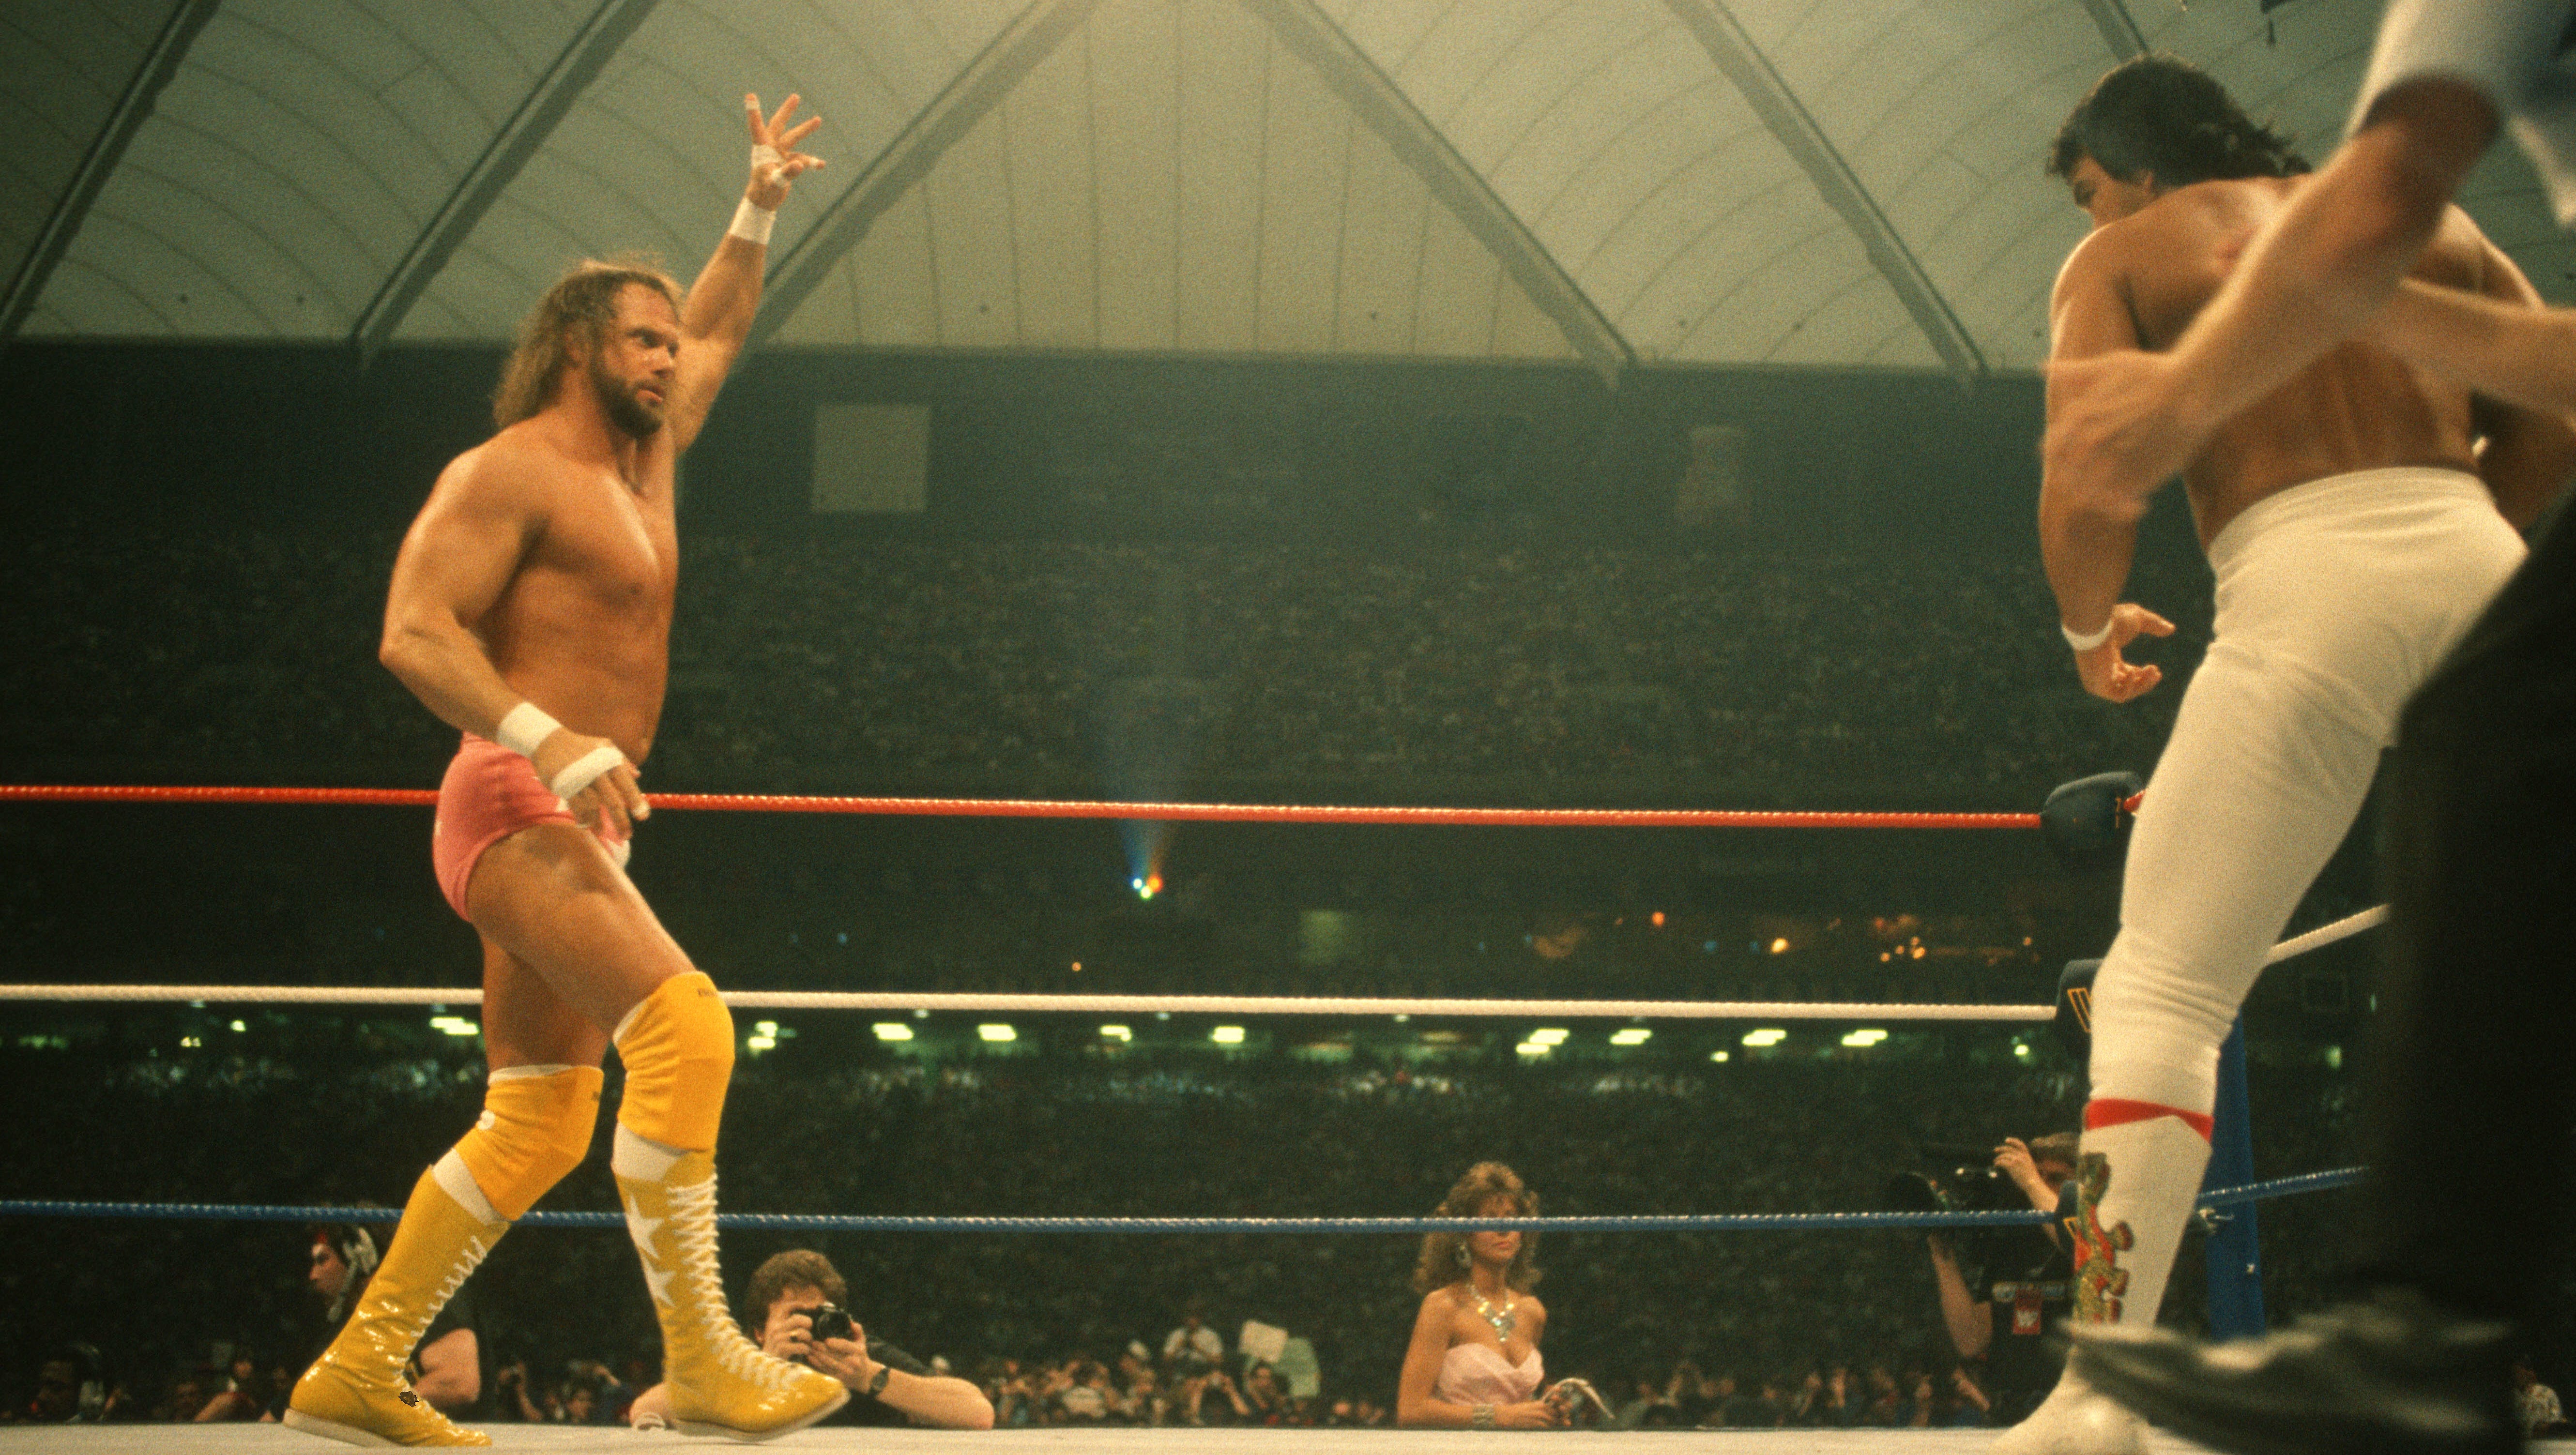 While Andre the Giant-Hulk Hogan was the main event, the match between Randy "Macho Man" Savage, left, and Ricky "The Dragon" Steamboat, right, was the most action-packed of the night -- and still is considered one of the greatest wrestling matches of all-time.